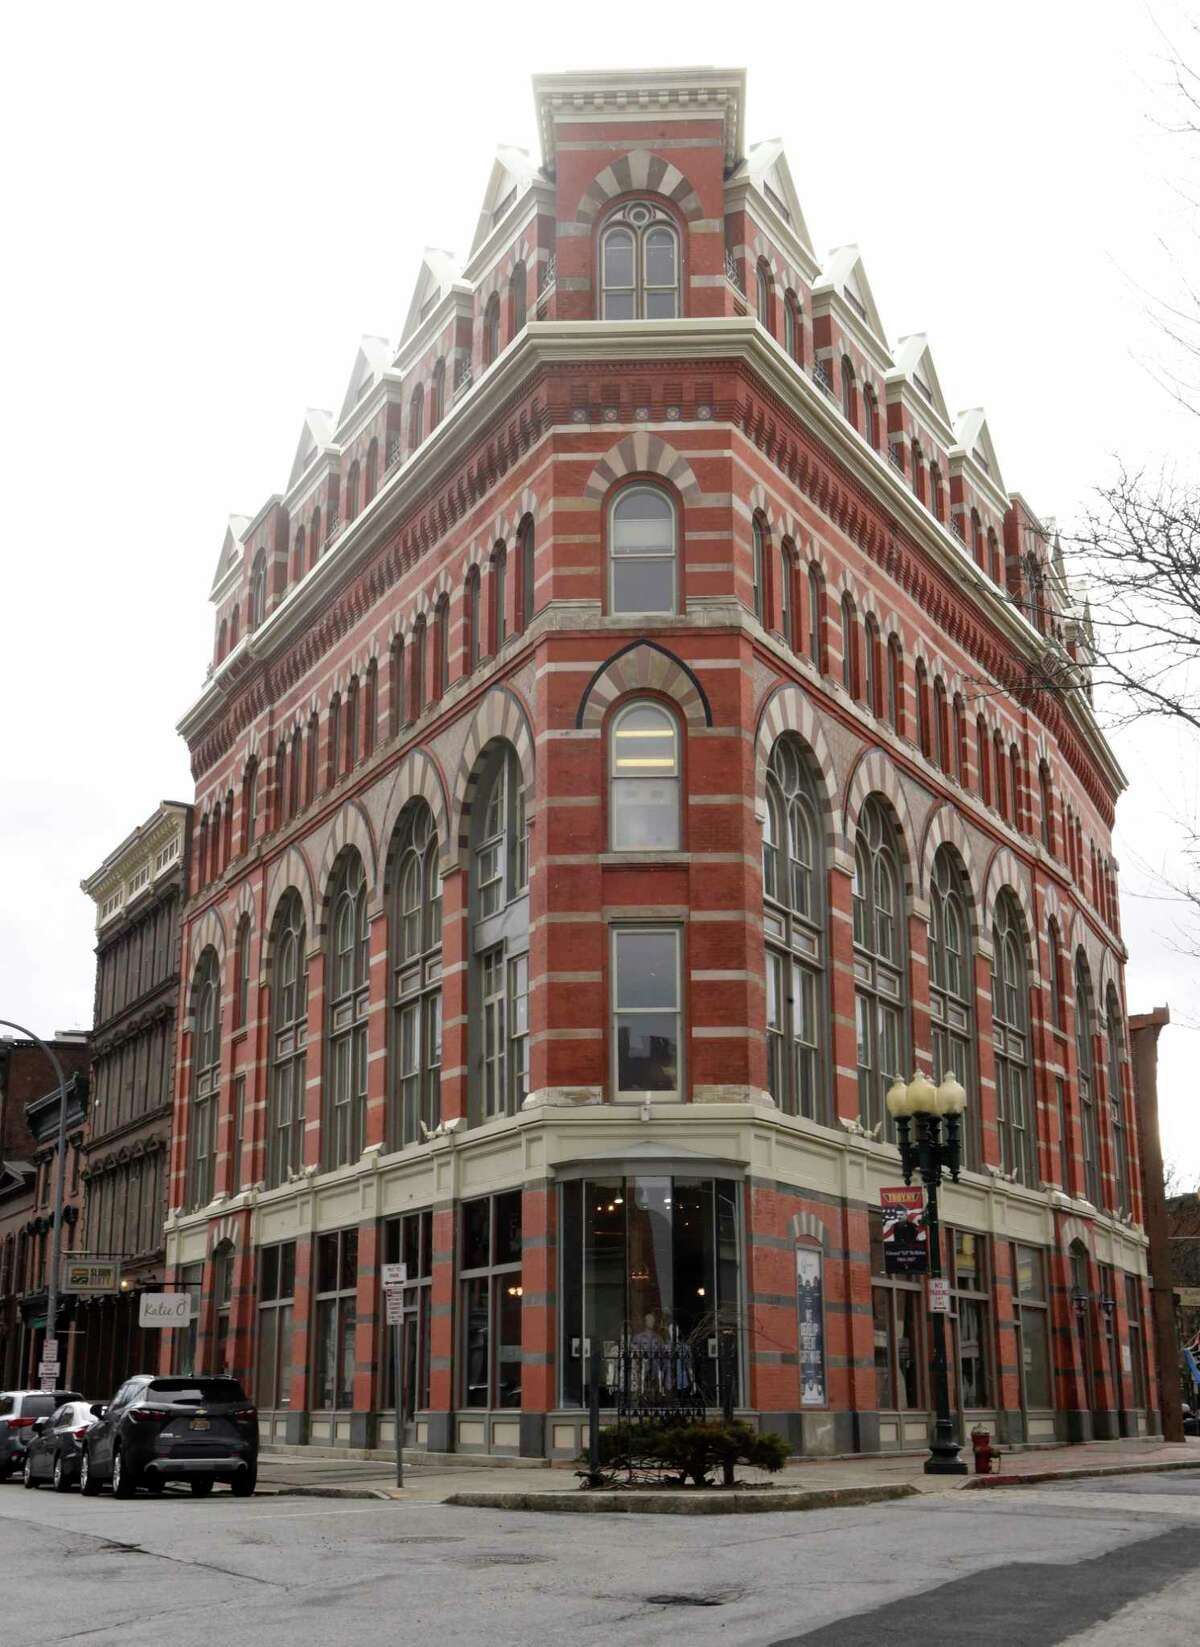 The Rice Building at First and River Streets might be one of the sites for filming The Gilded Age TV show on HBO on Thursday, Feb. 27, 2020 in Troy, N.Y. (Lori Van Buren/Times Union)